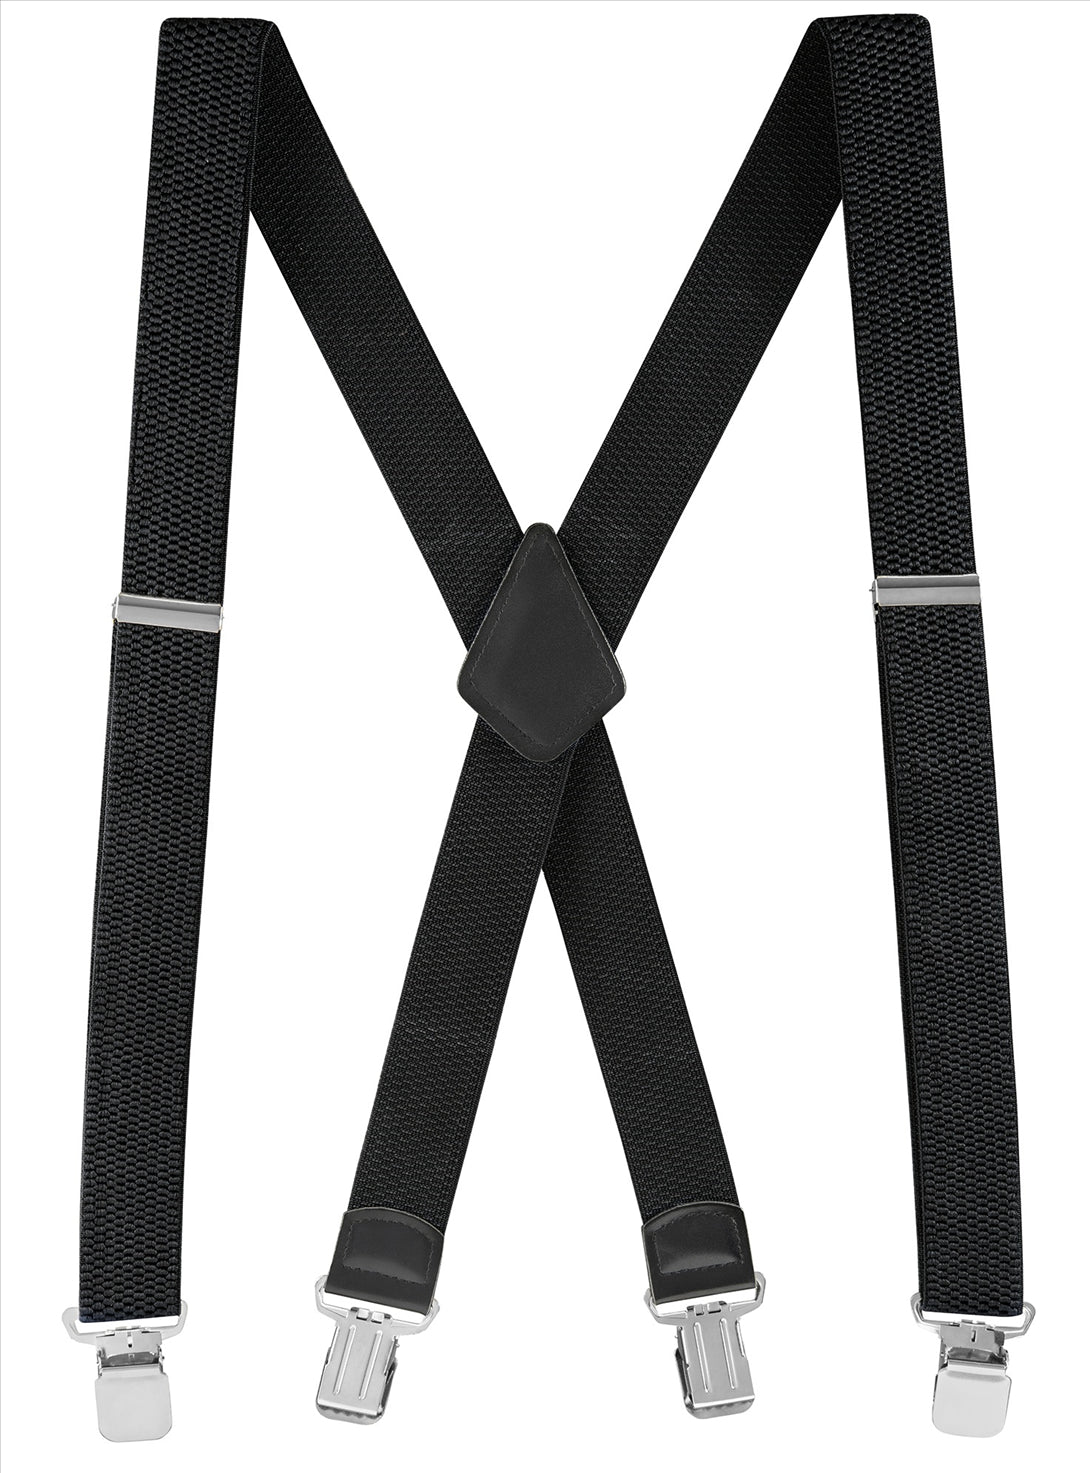 Buyless Fashion Textured Suspenders for Men - 48